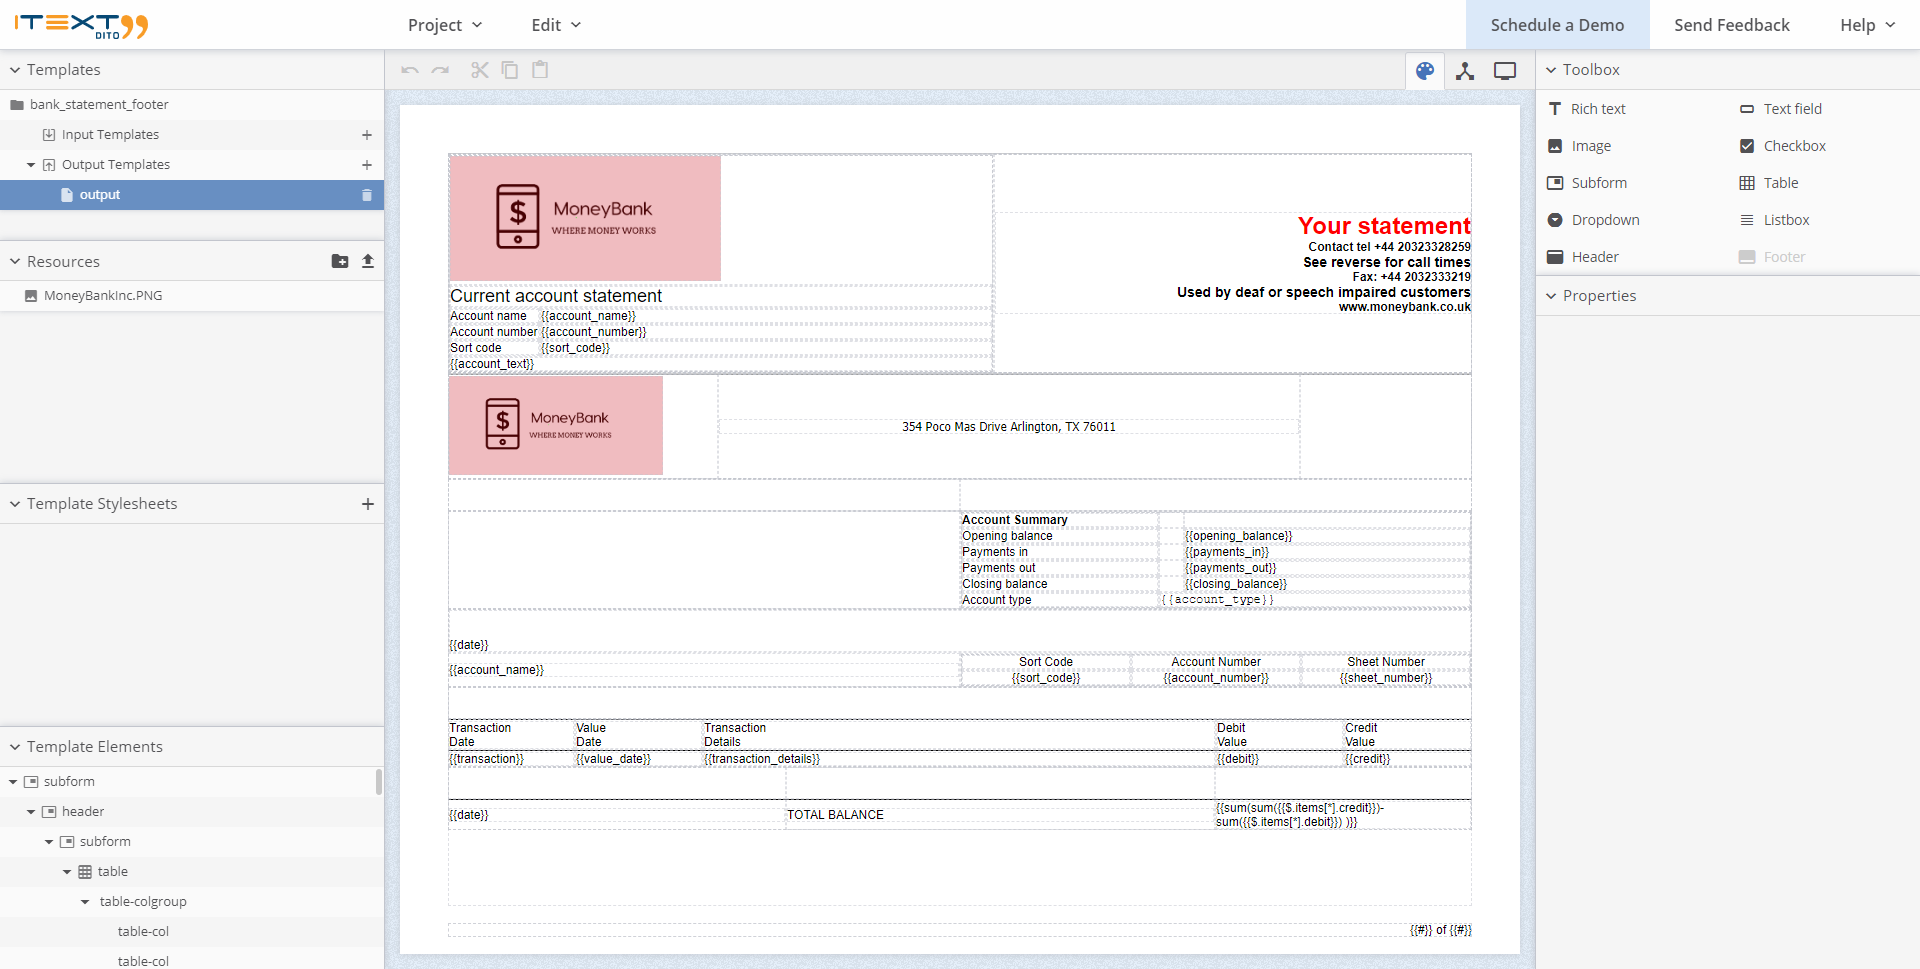 DITO Template Editor screenshot of a bank statement template